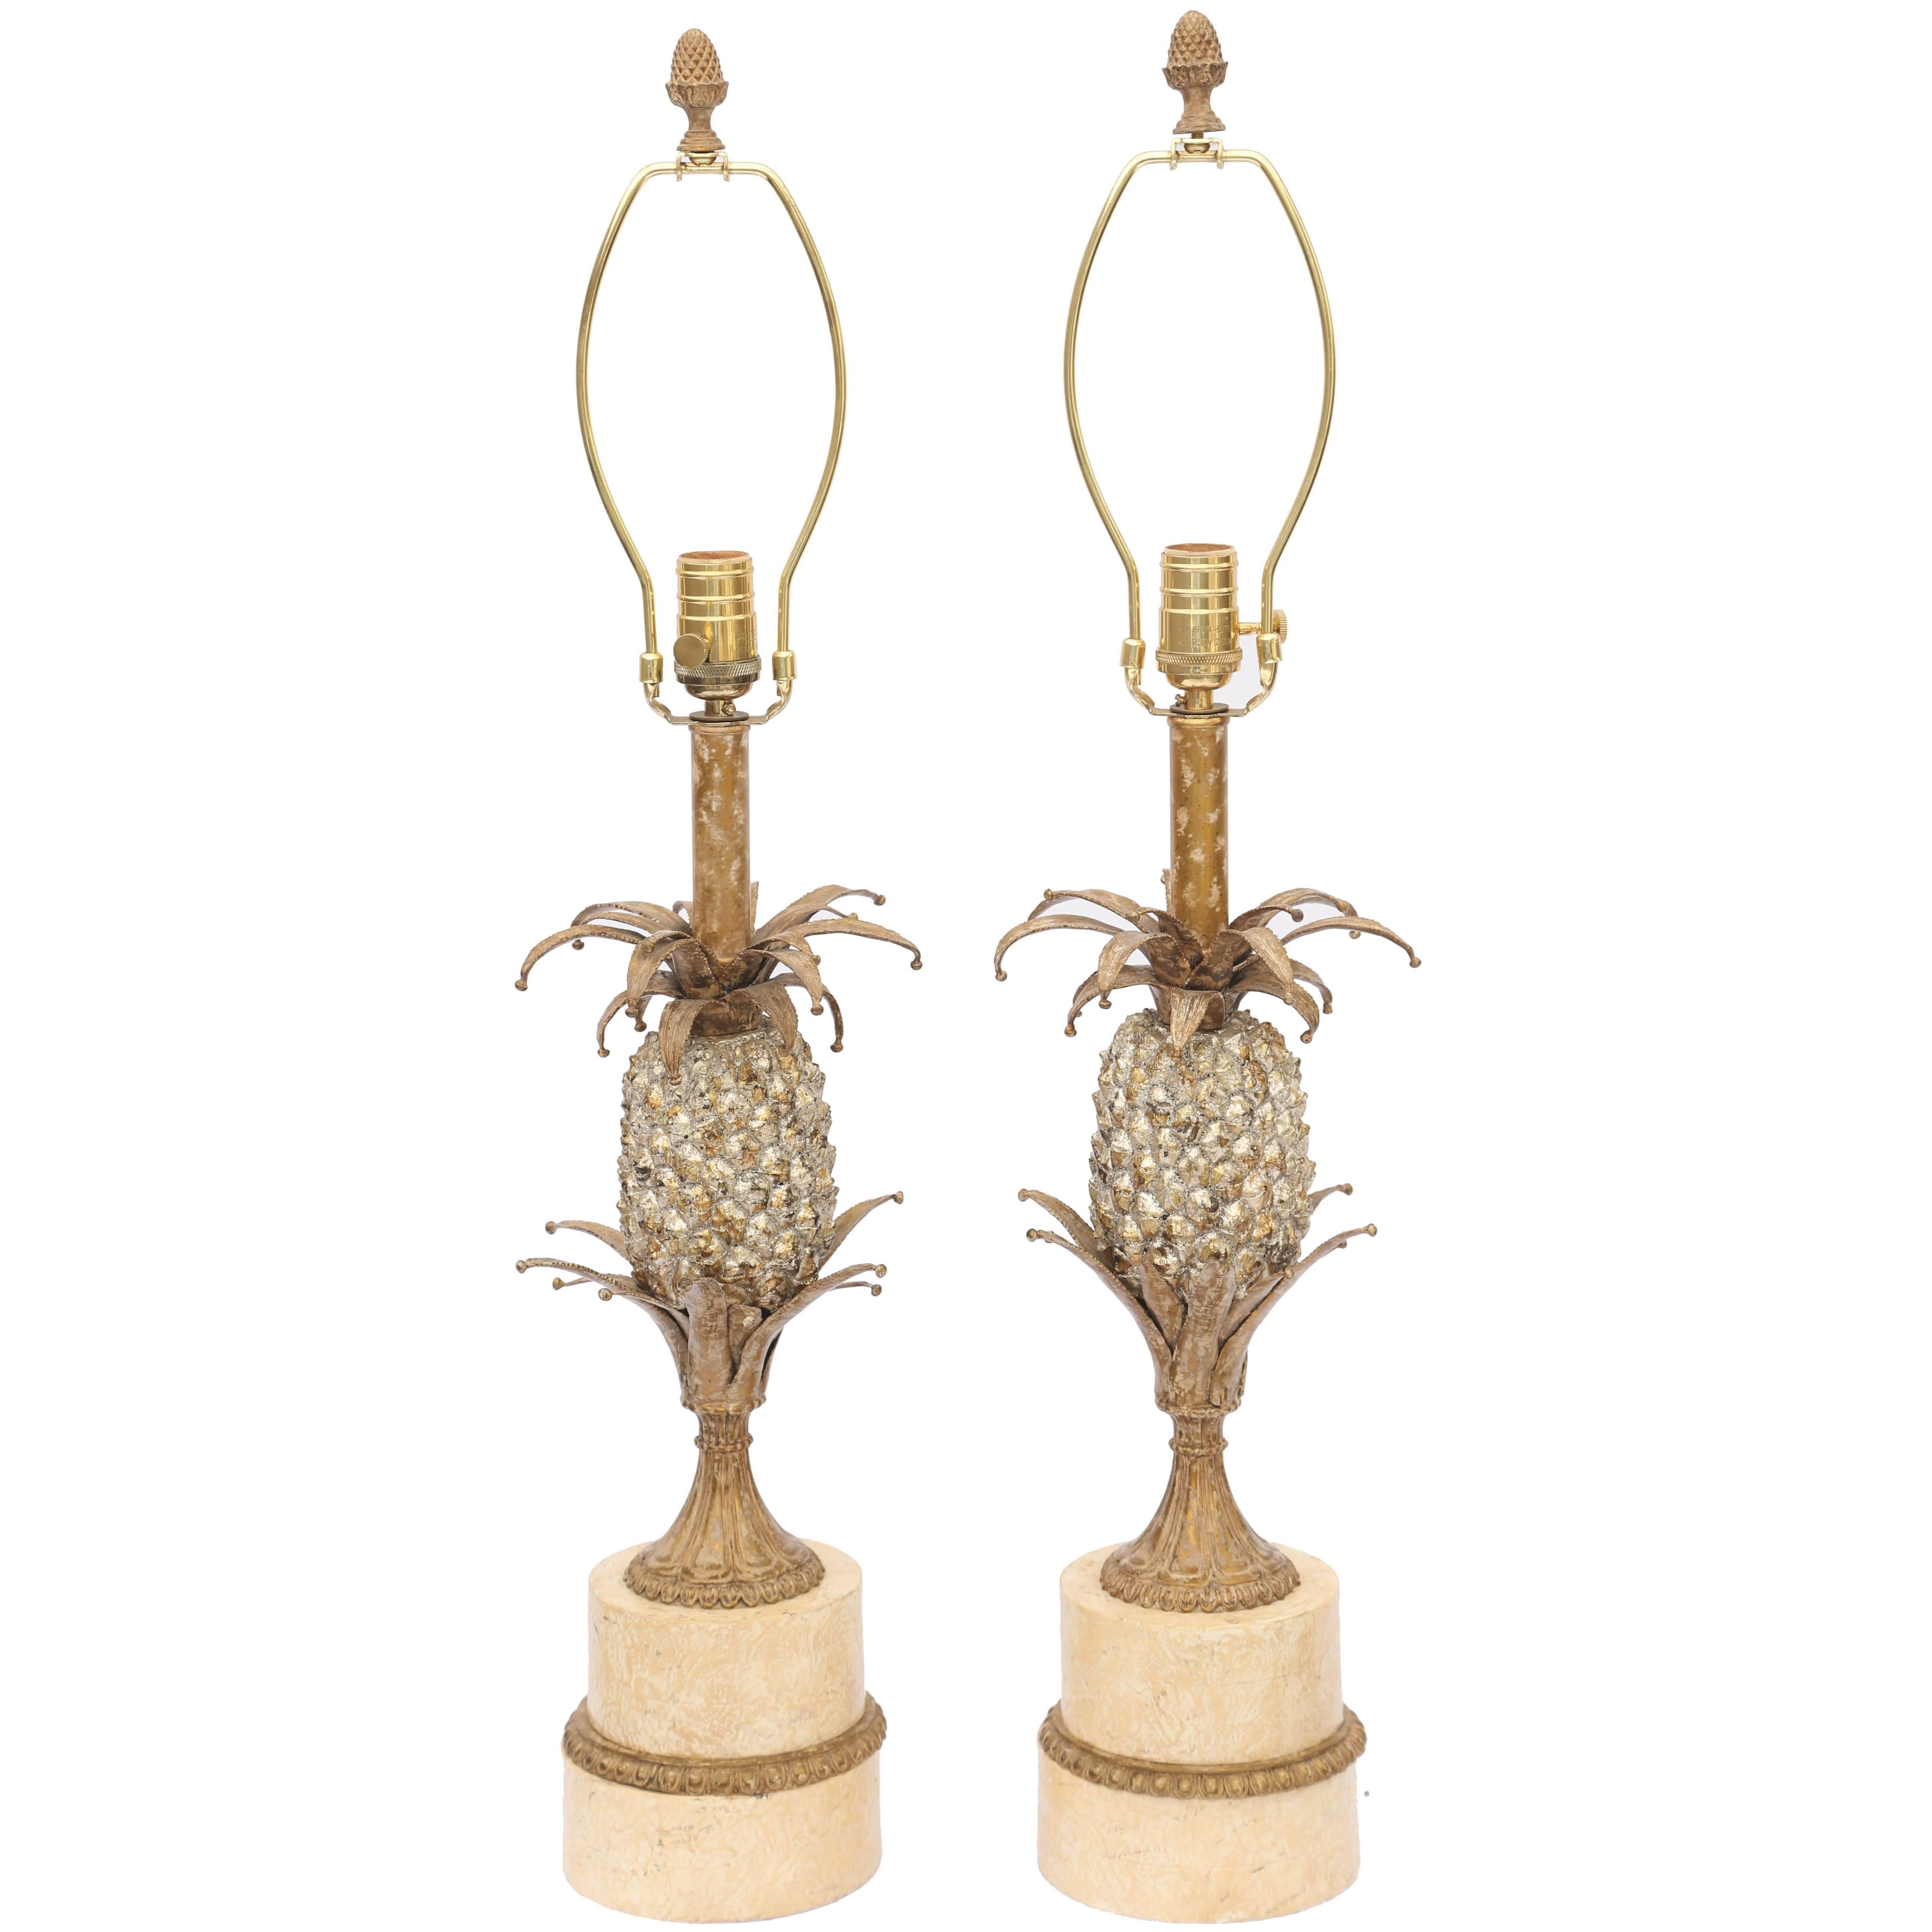 Pair of Gilt Metal Pineapple Form Table Lamps For Sale